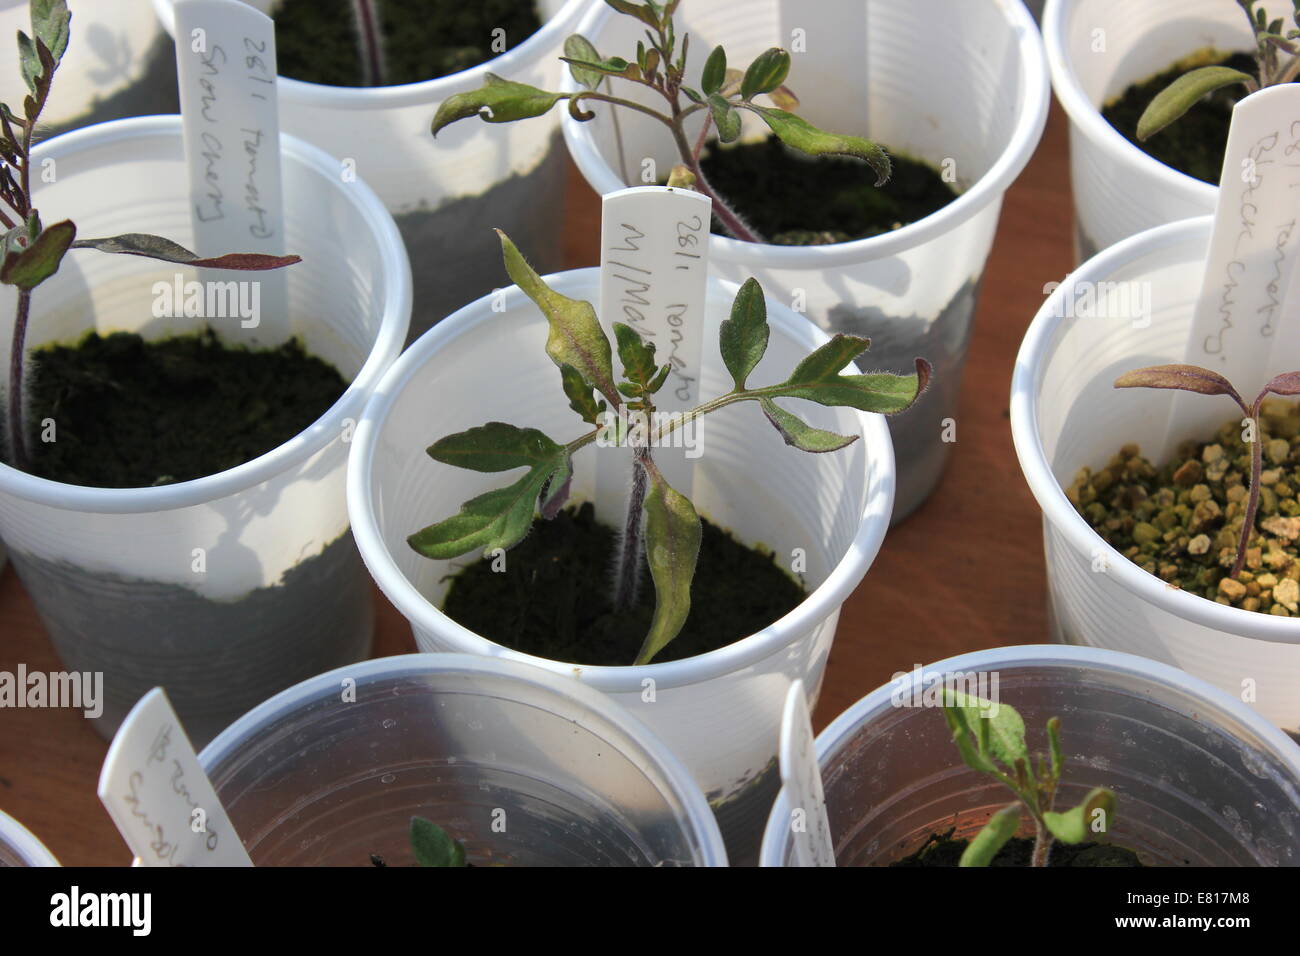 Tomato seedlings in plastic cups Stock Photo